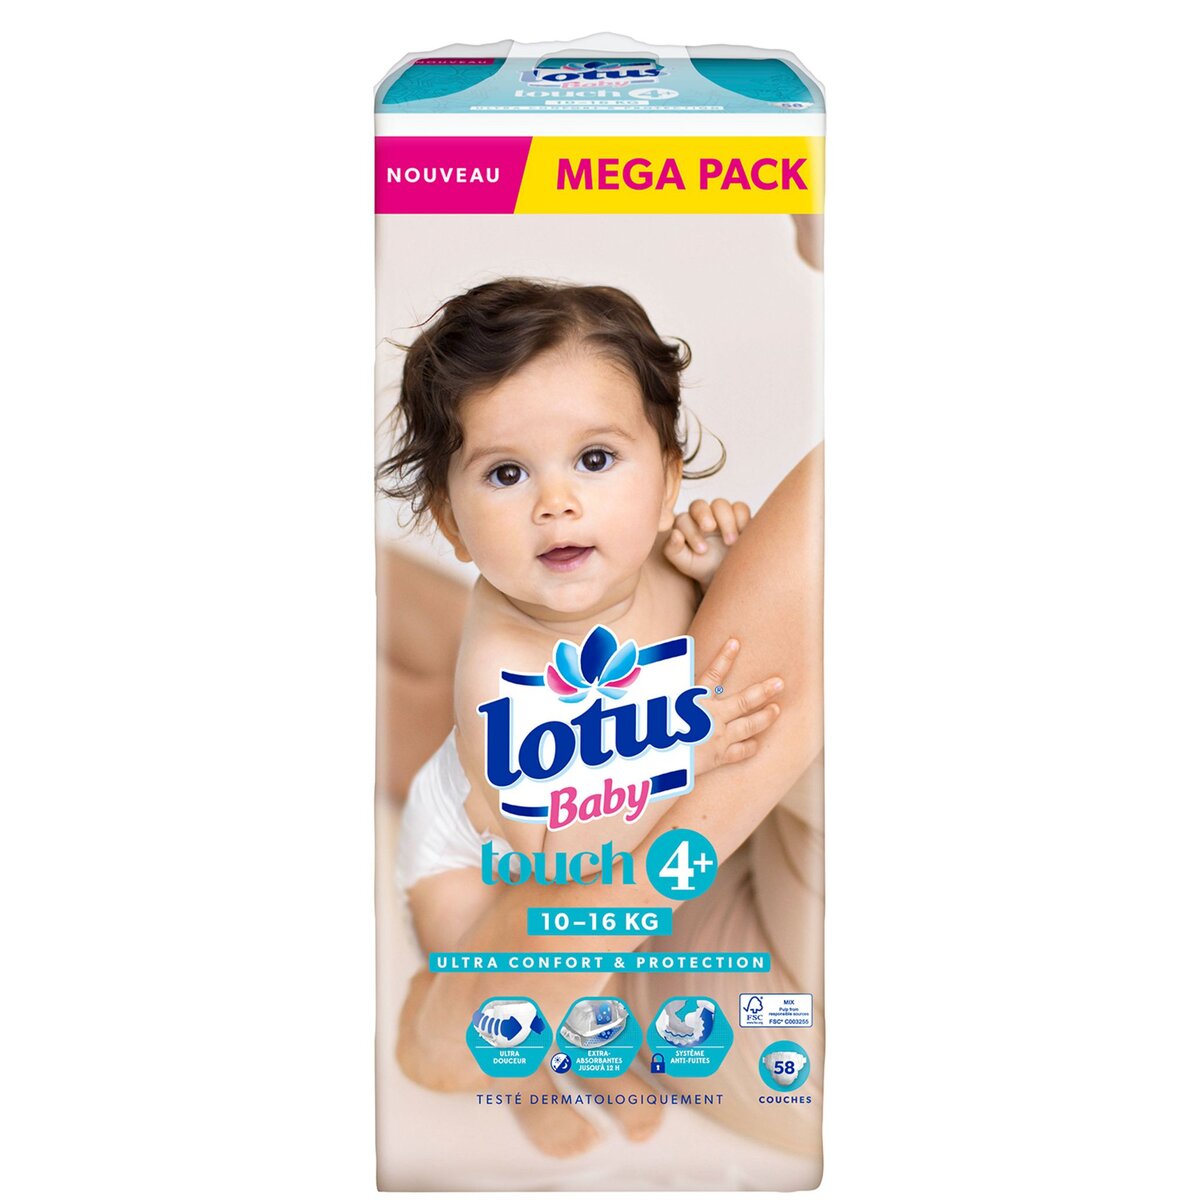 LOTUS Lotus baby Natural touch mega pack couches taille 4+ (10-16kg) x58 58 couches